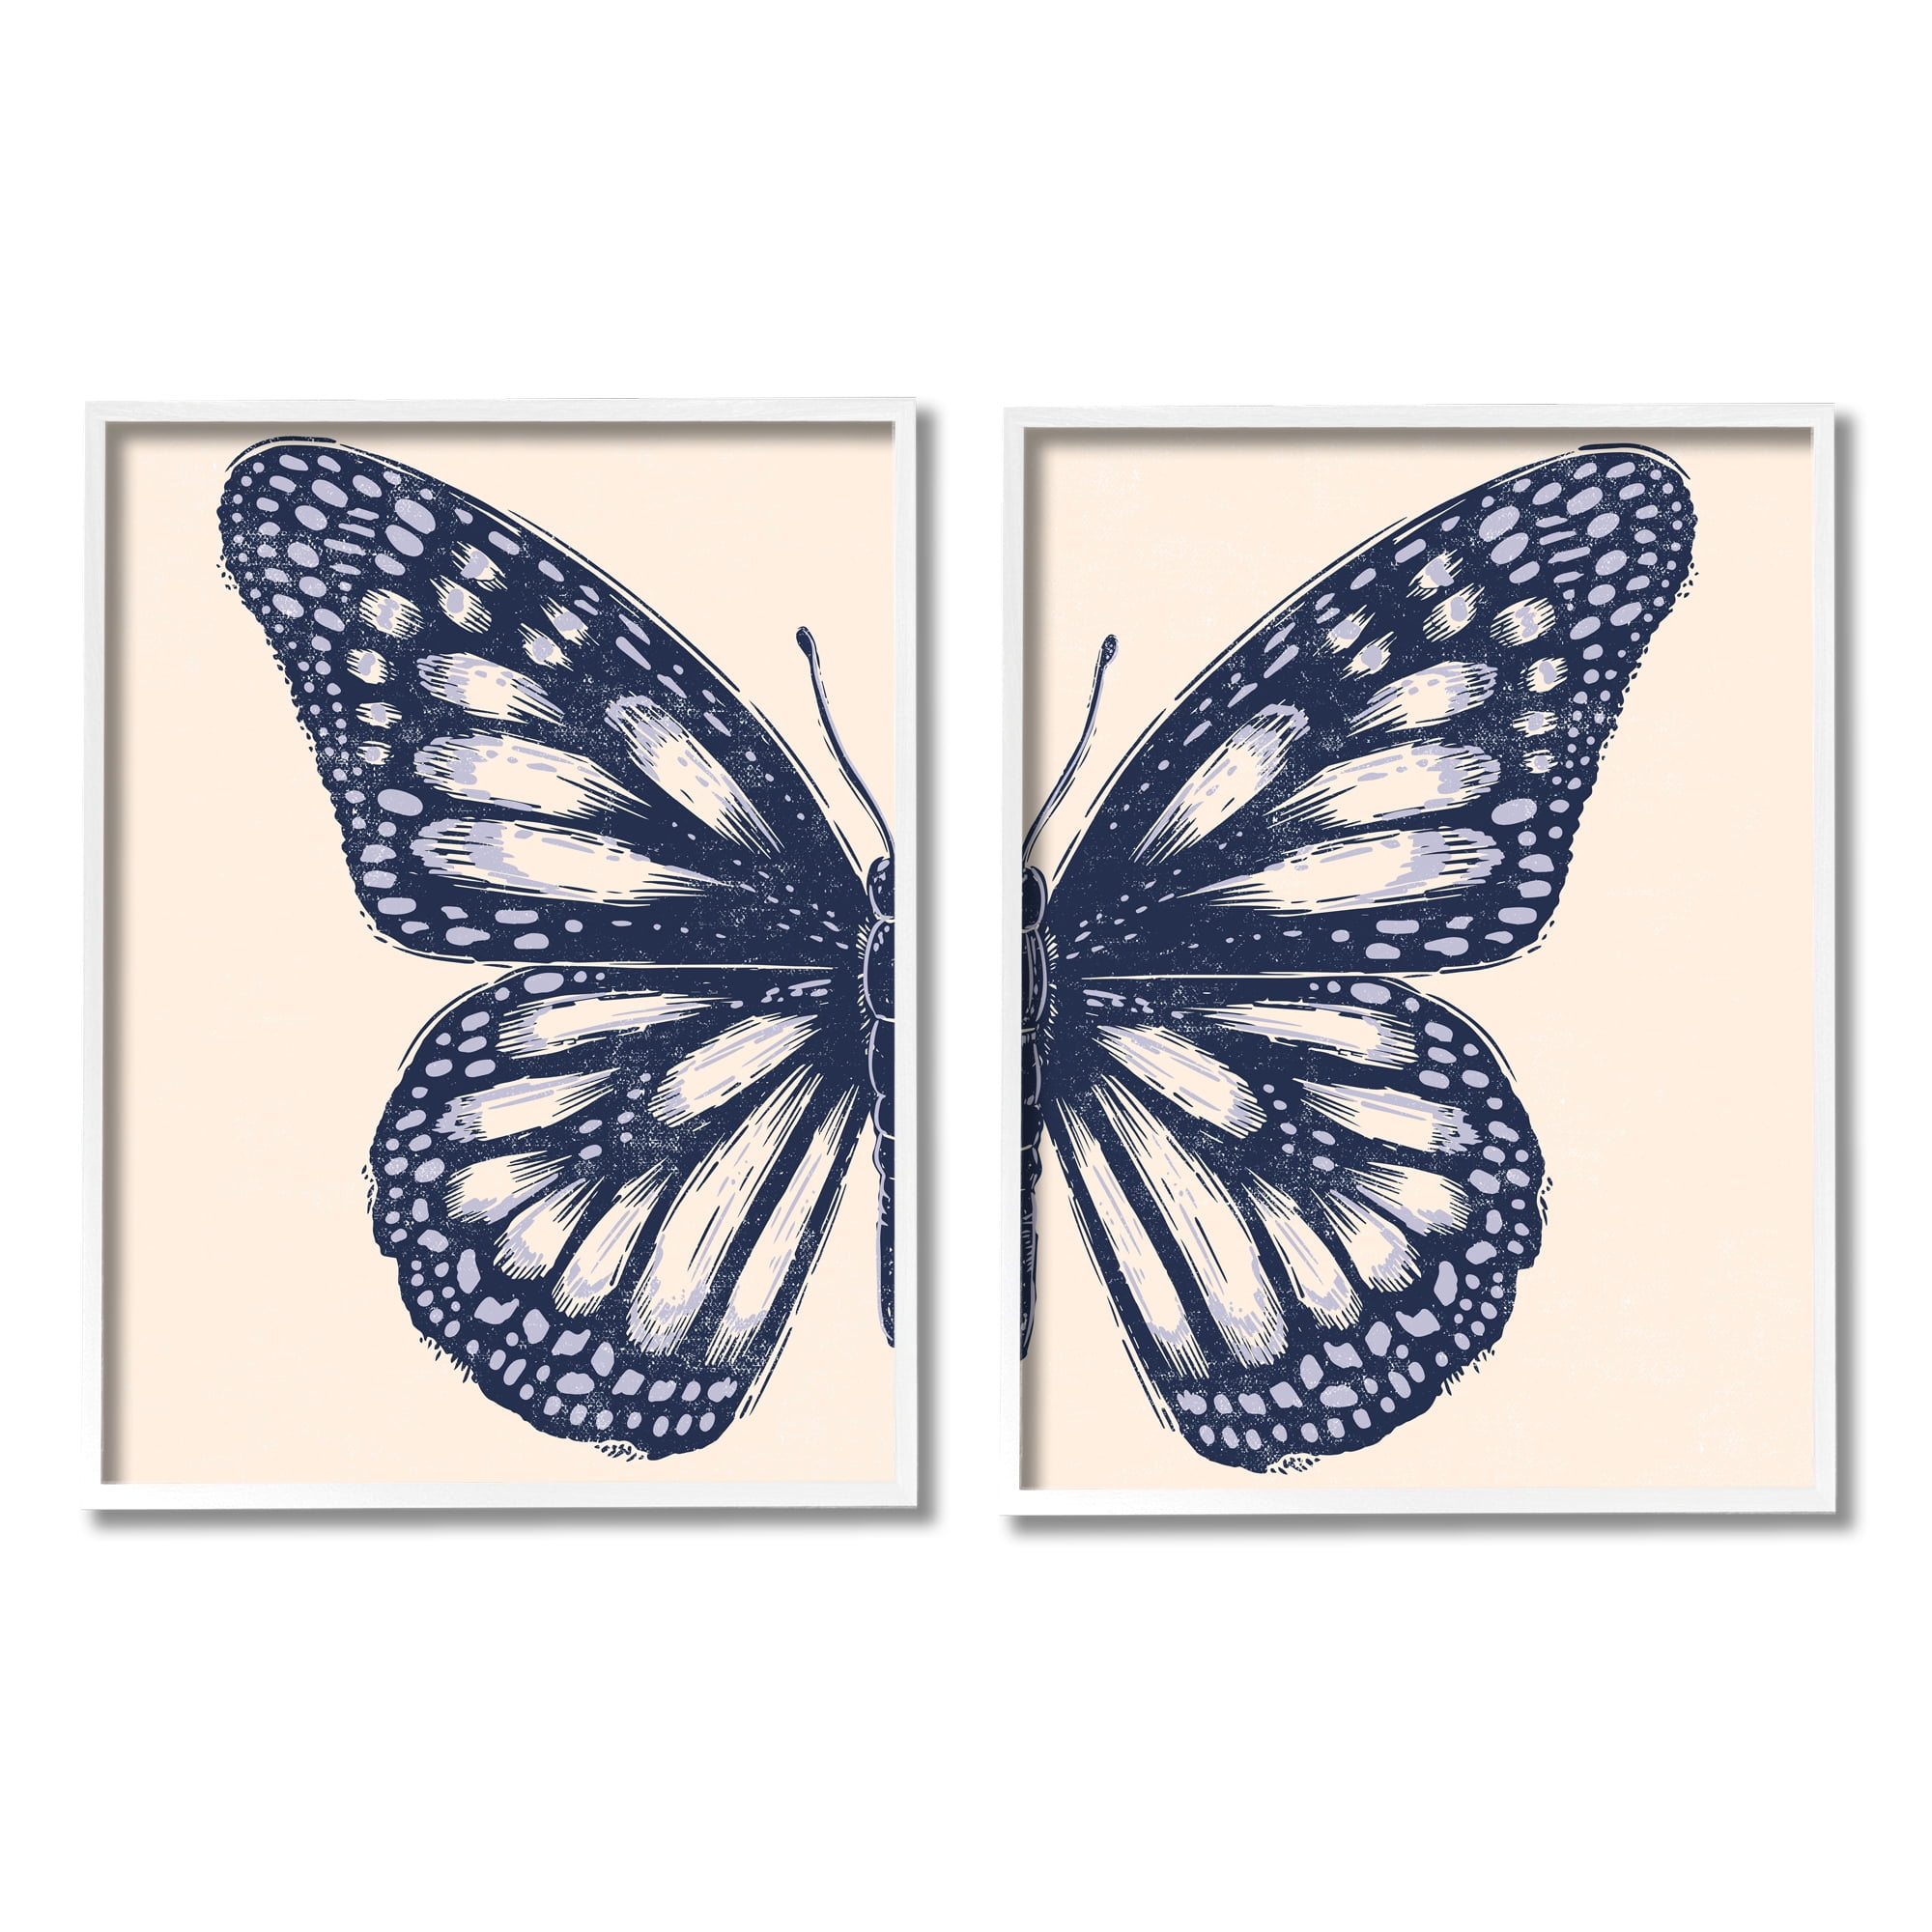 Butterfly Drawing Pattern PNG Images For Free Download - Pngtree